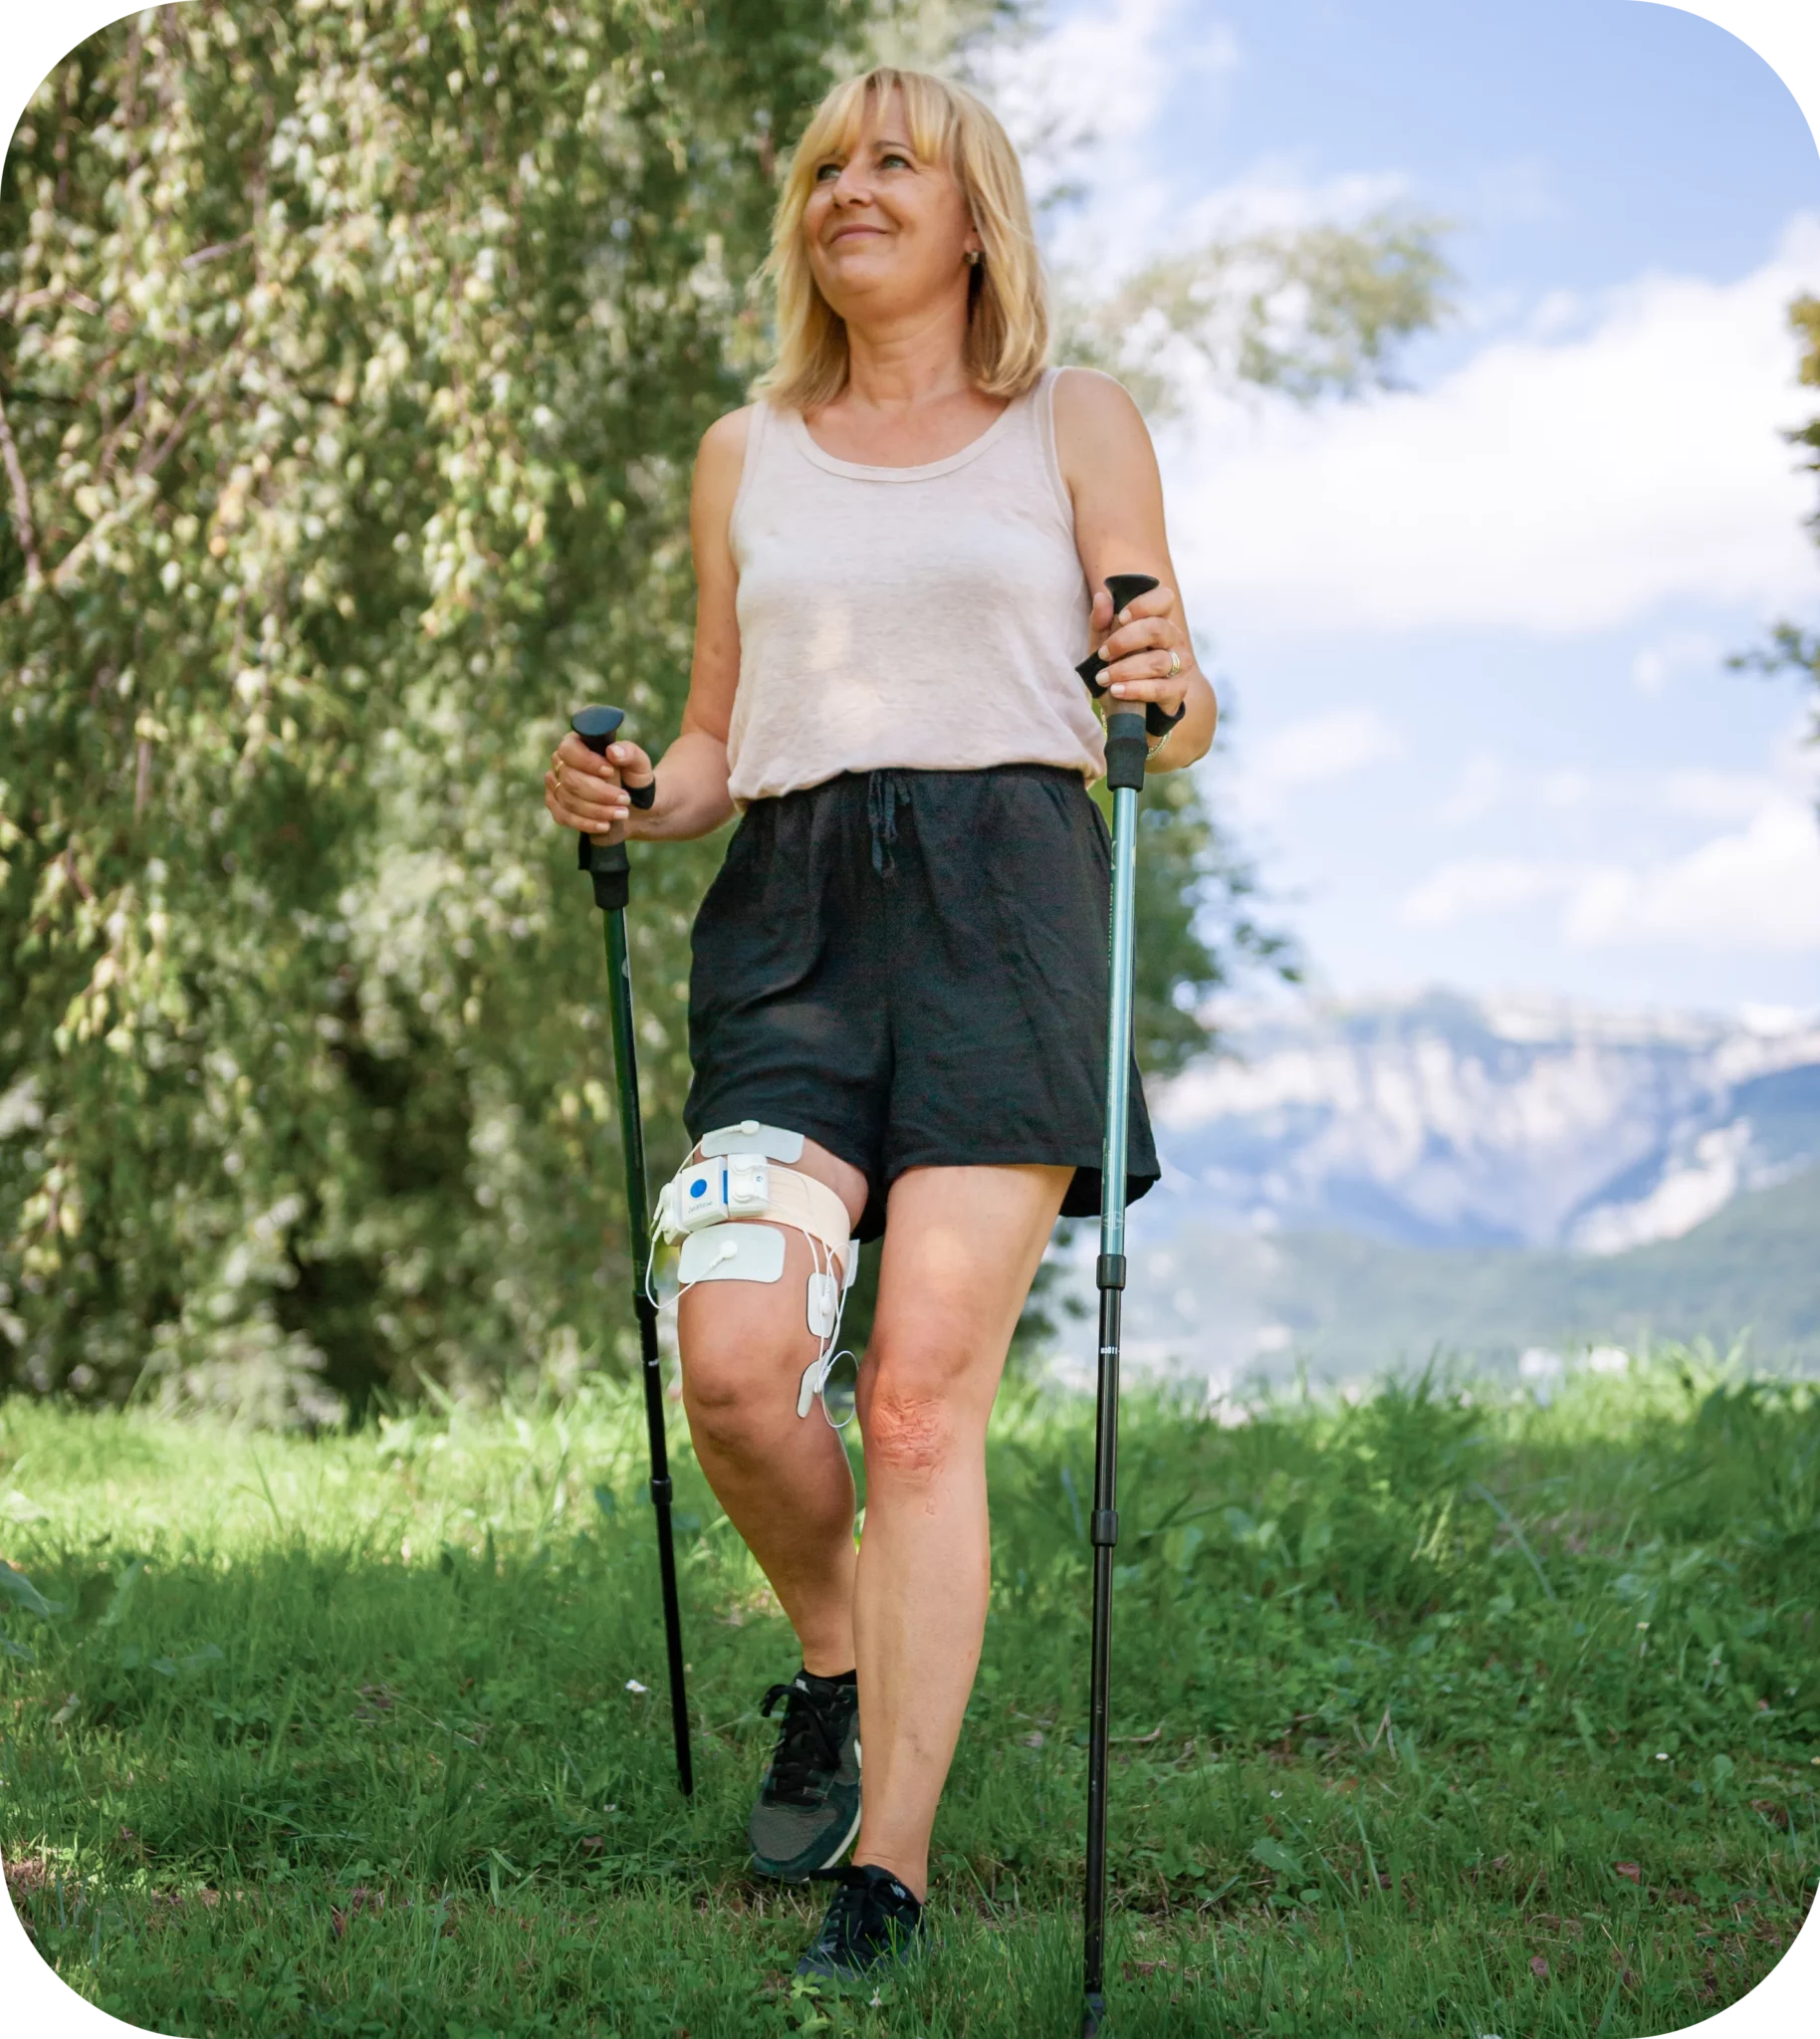 A woman wearing actiTENS on her knee to relieve knee pain during a hike.